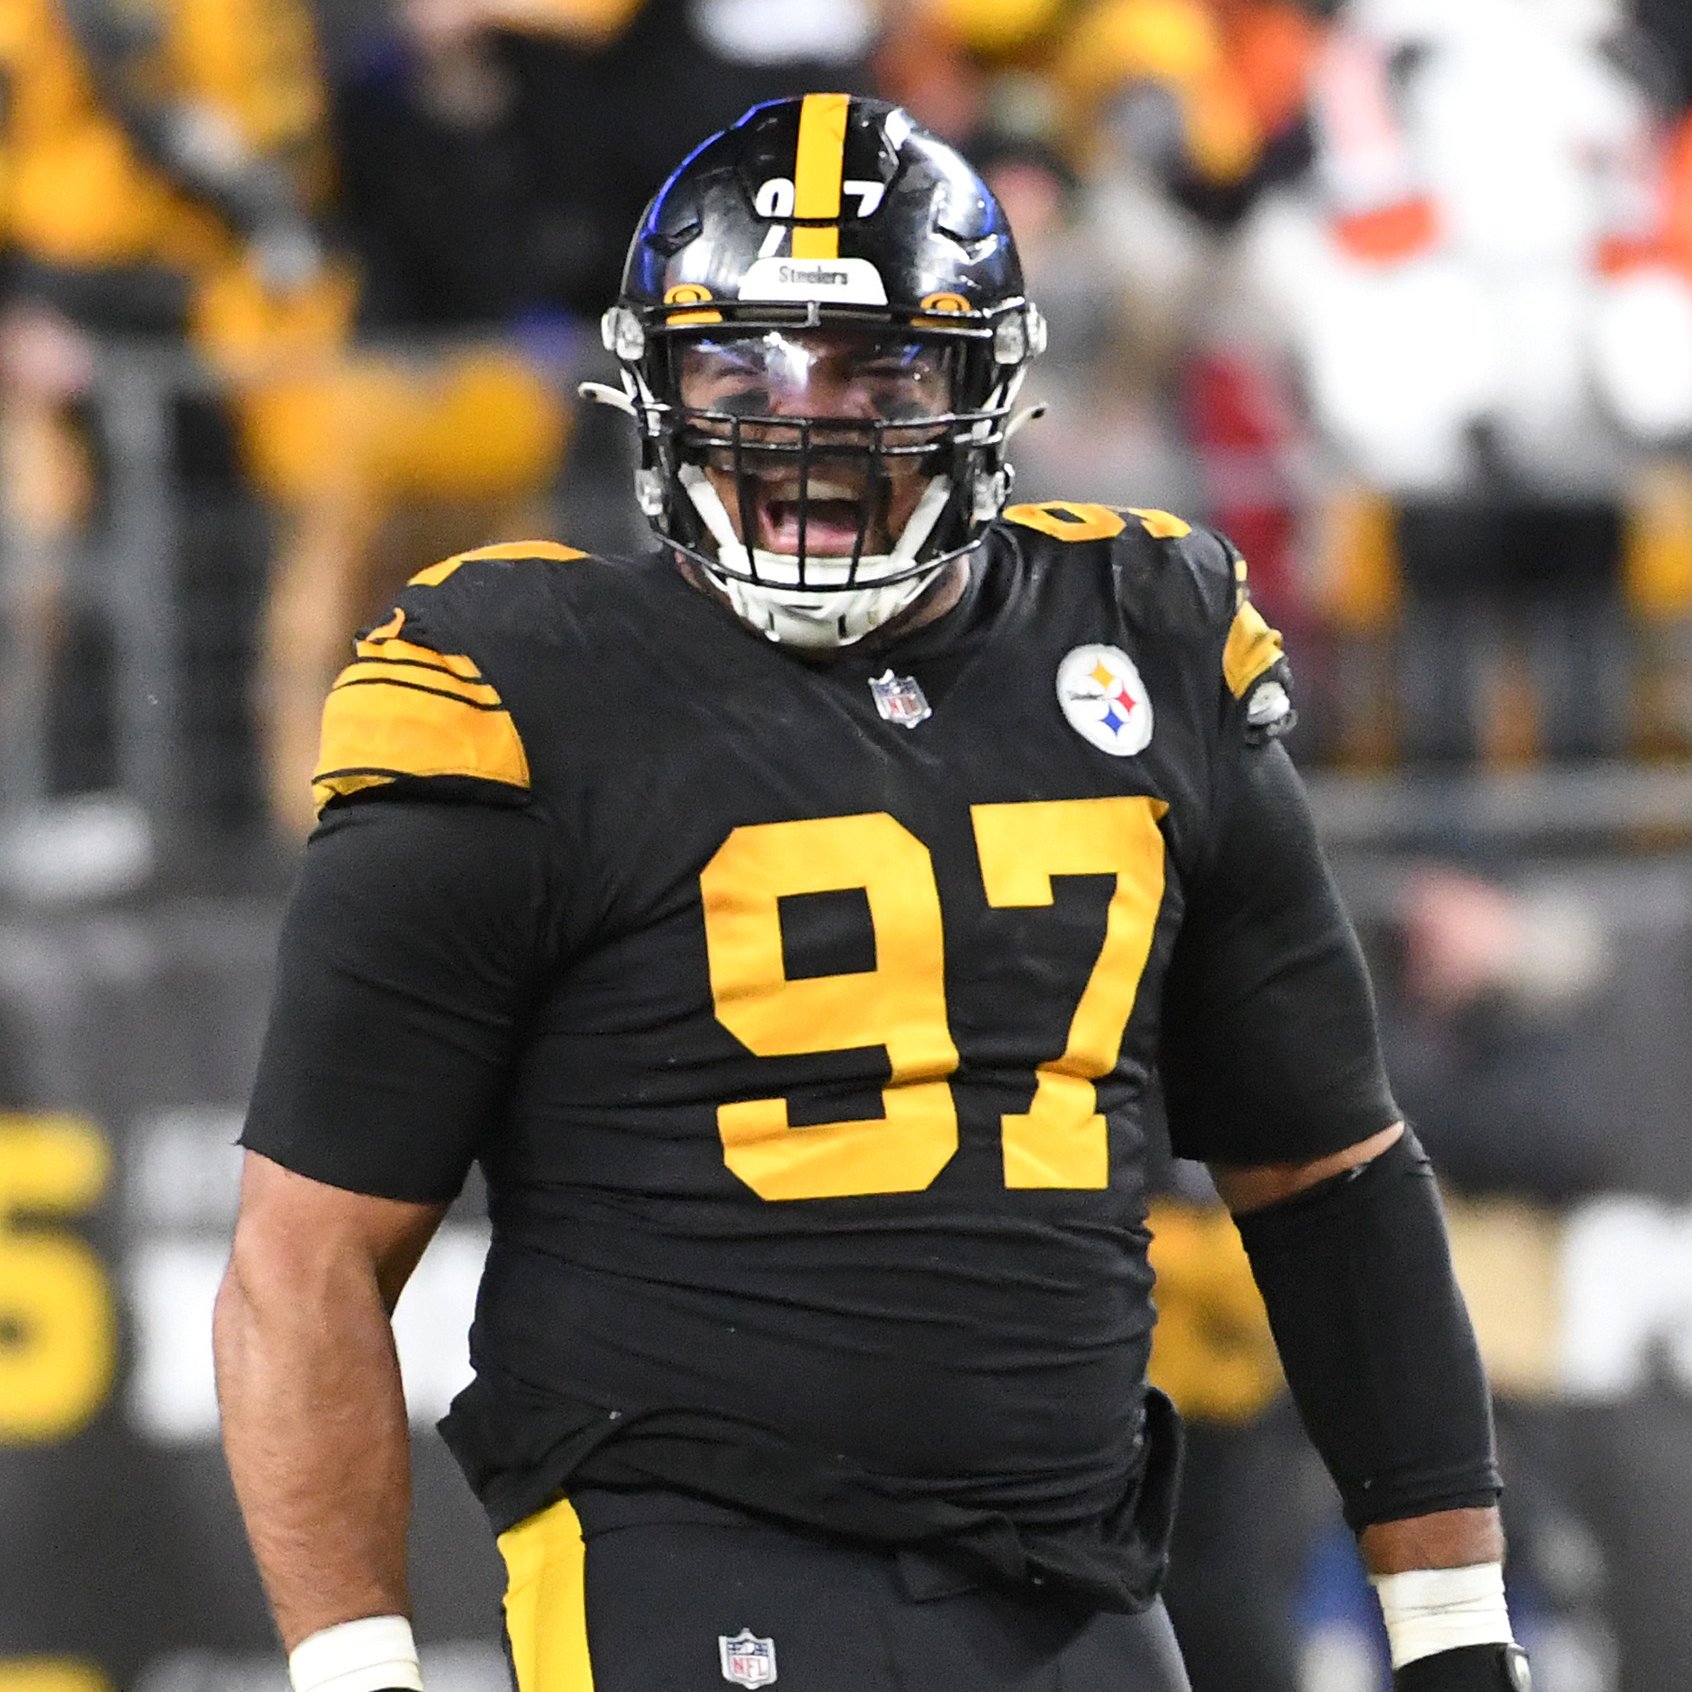 PFF PIT Steelers on X: 'Cameron Heyward's 90.4 PFF grade this season ranks  5th among interior defensive linemen through Week 16. It's his fourth  consecutive year ranking in the top-5 at the